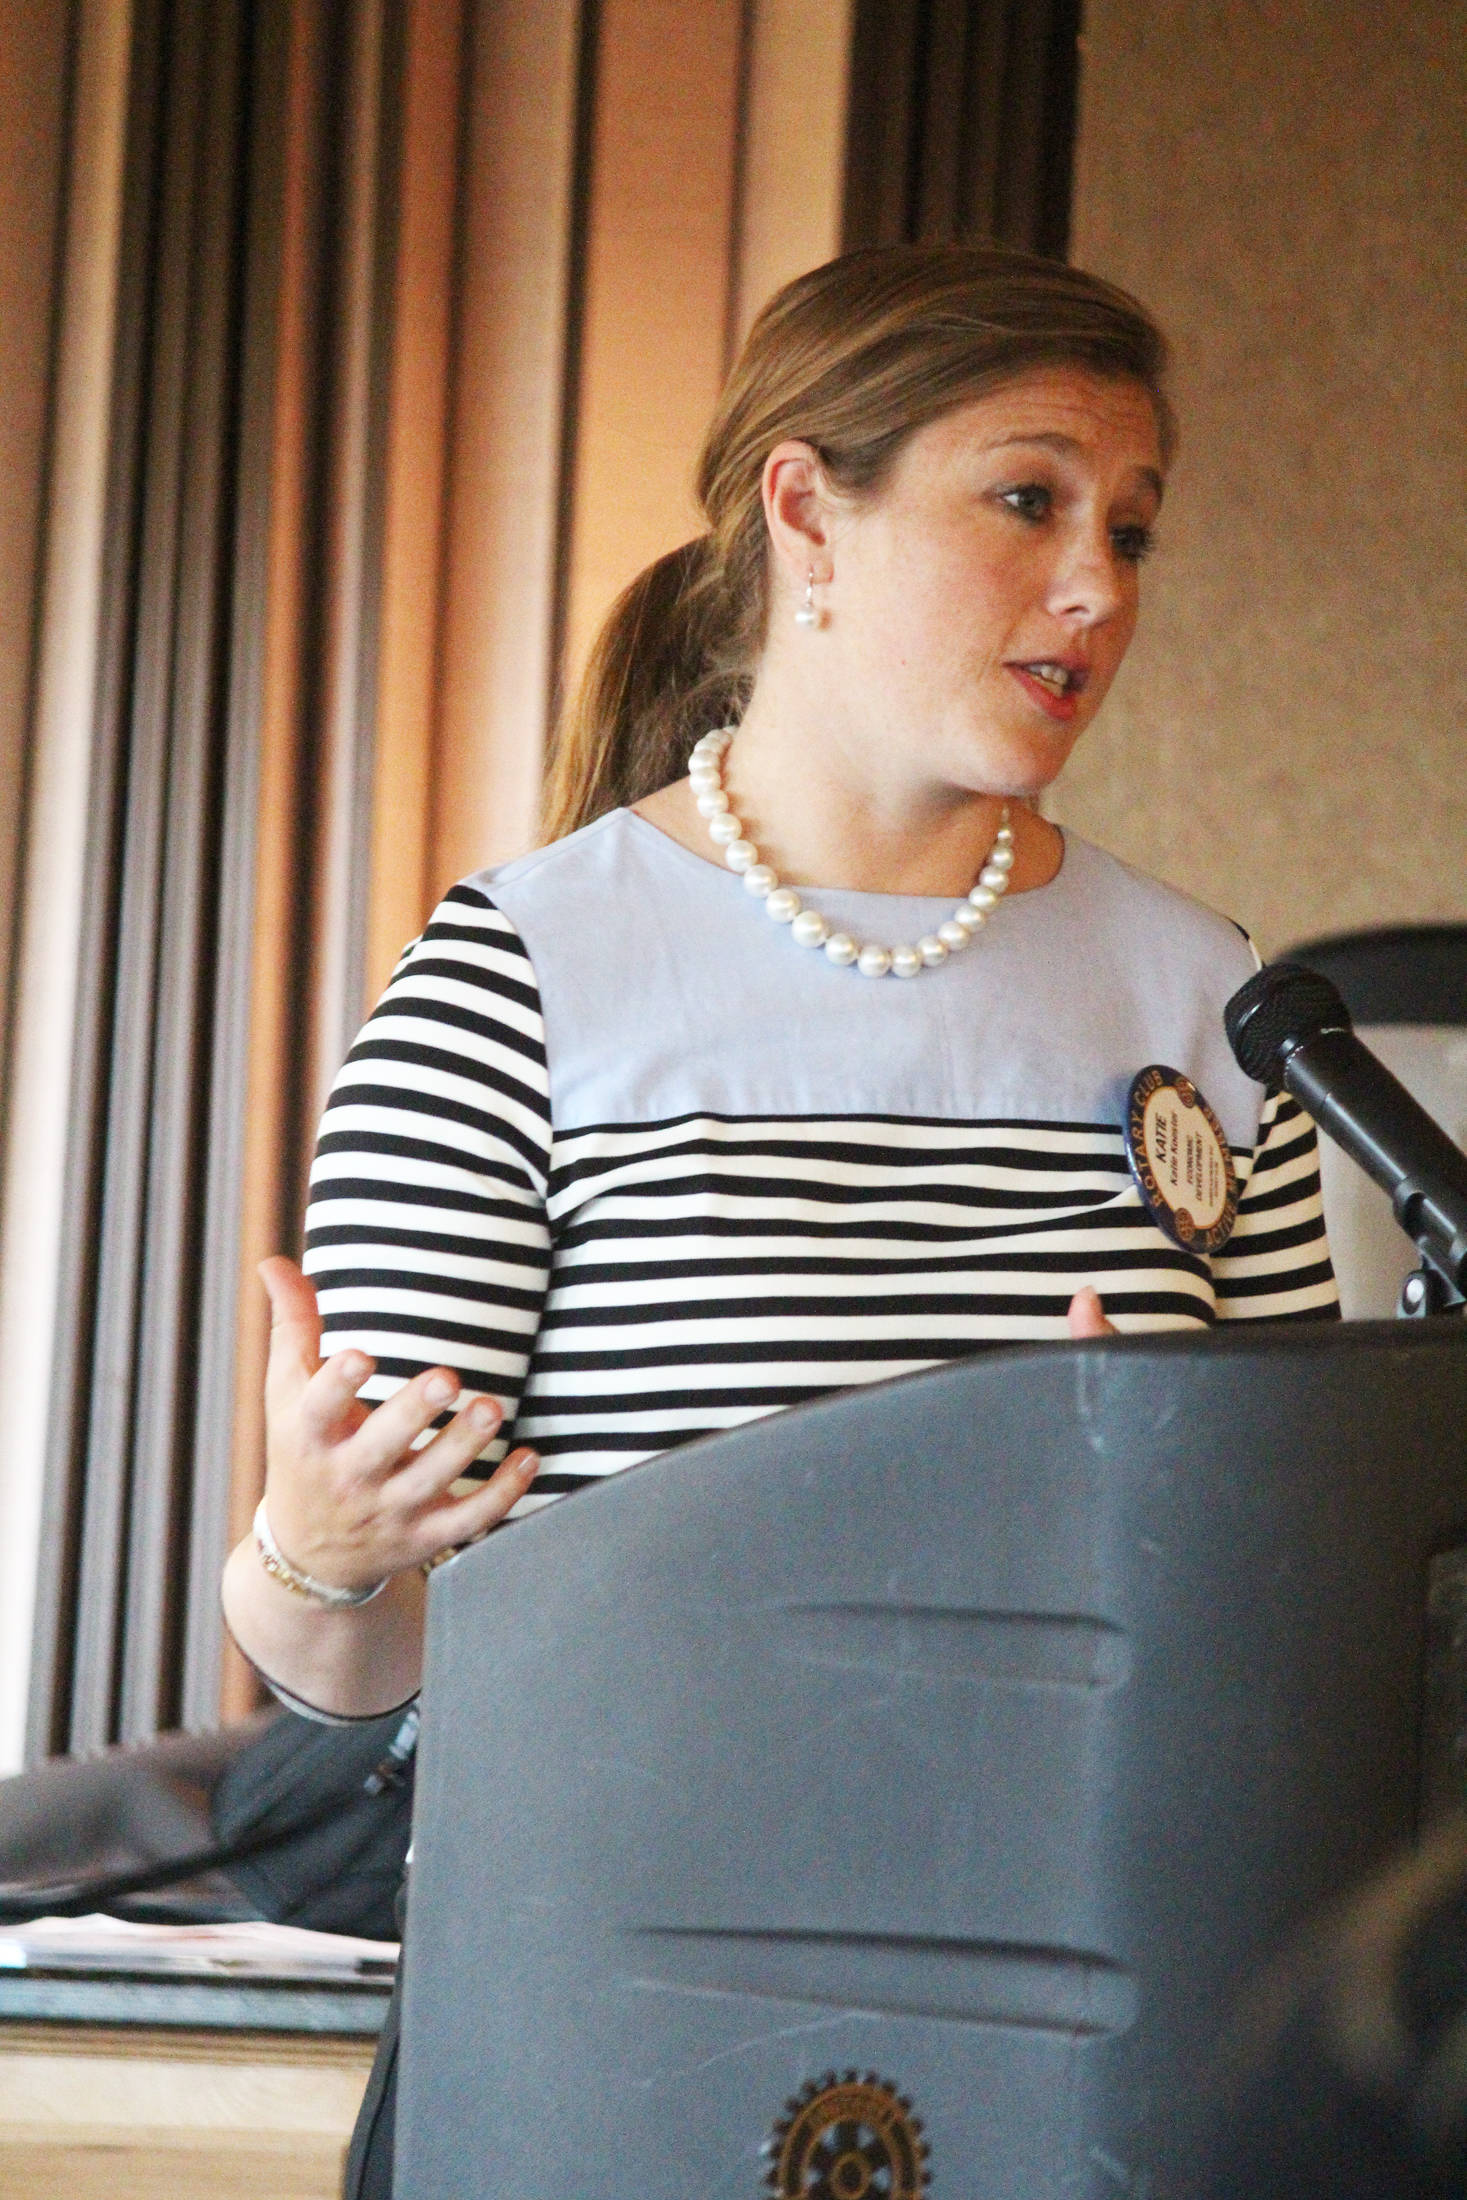 Homer City Manager Katie Koester speaks to the Kachemak Bay Rotary Club about the city’s proposition to use a portion of the HART fund to pay for maintenance during the club’s meeting Thursday, Sept. 21, 2017 in Homer, Alaska. (Photo by Megan Pacer/Homer News)